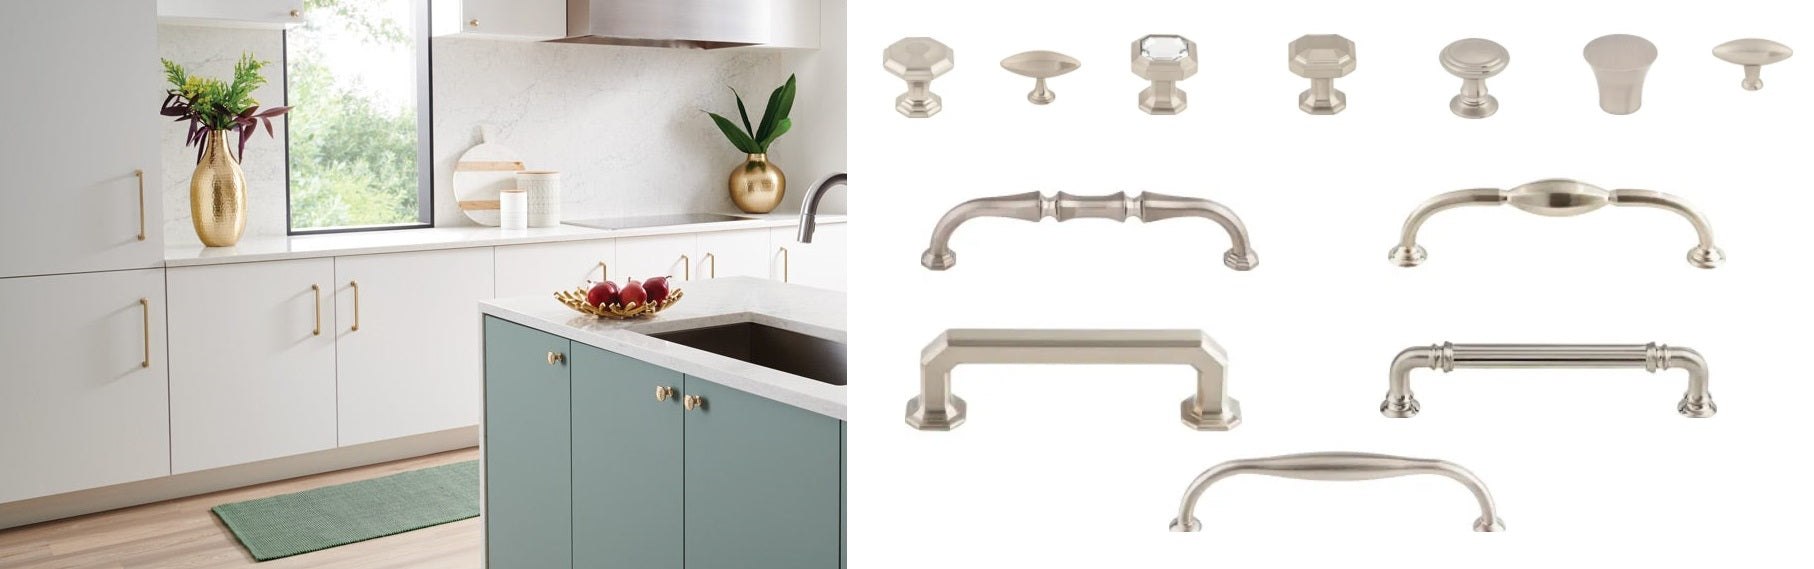 Buying Kitchen Cabinet Handles and Knobs - CapriCoast Blog